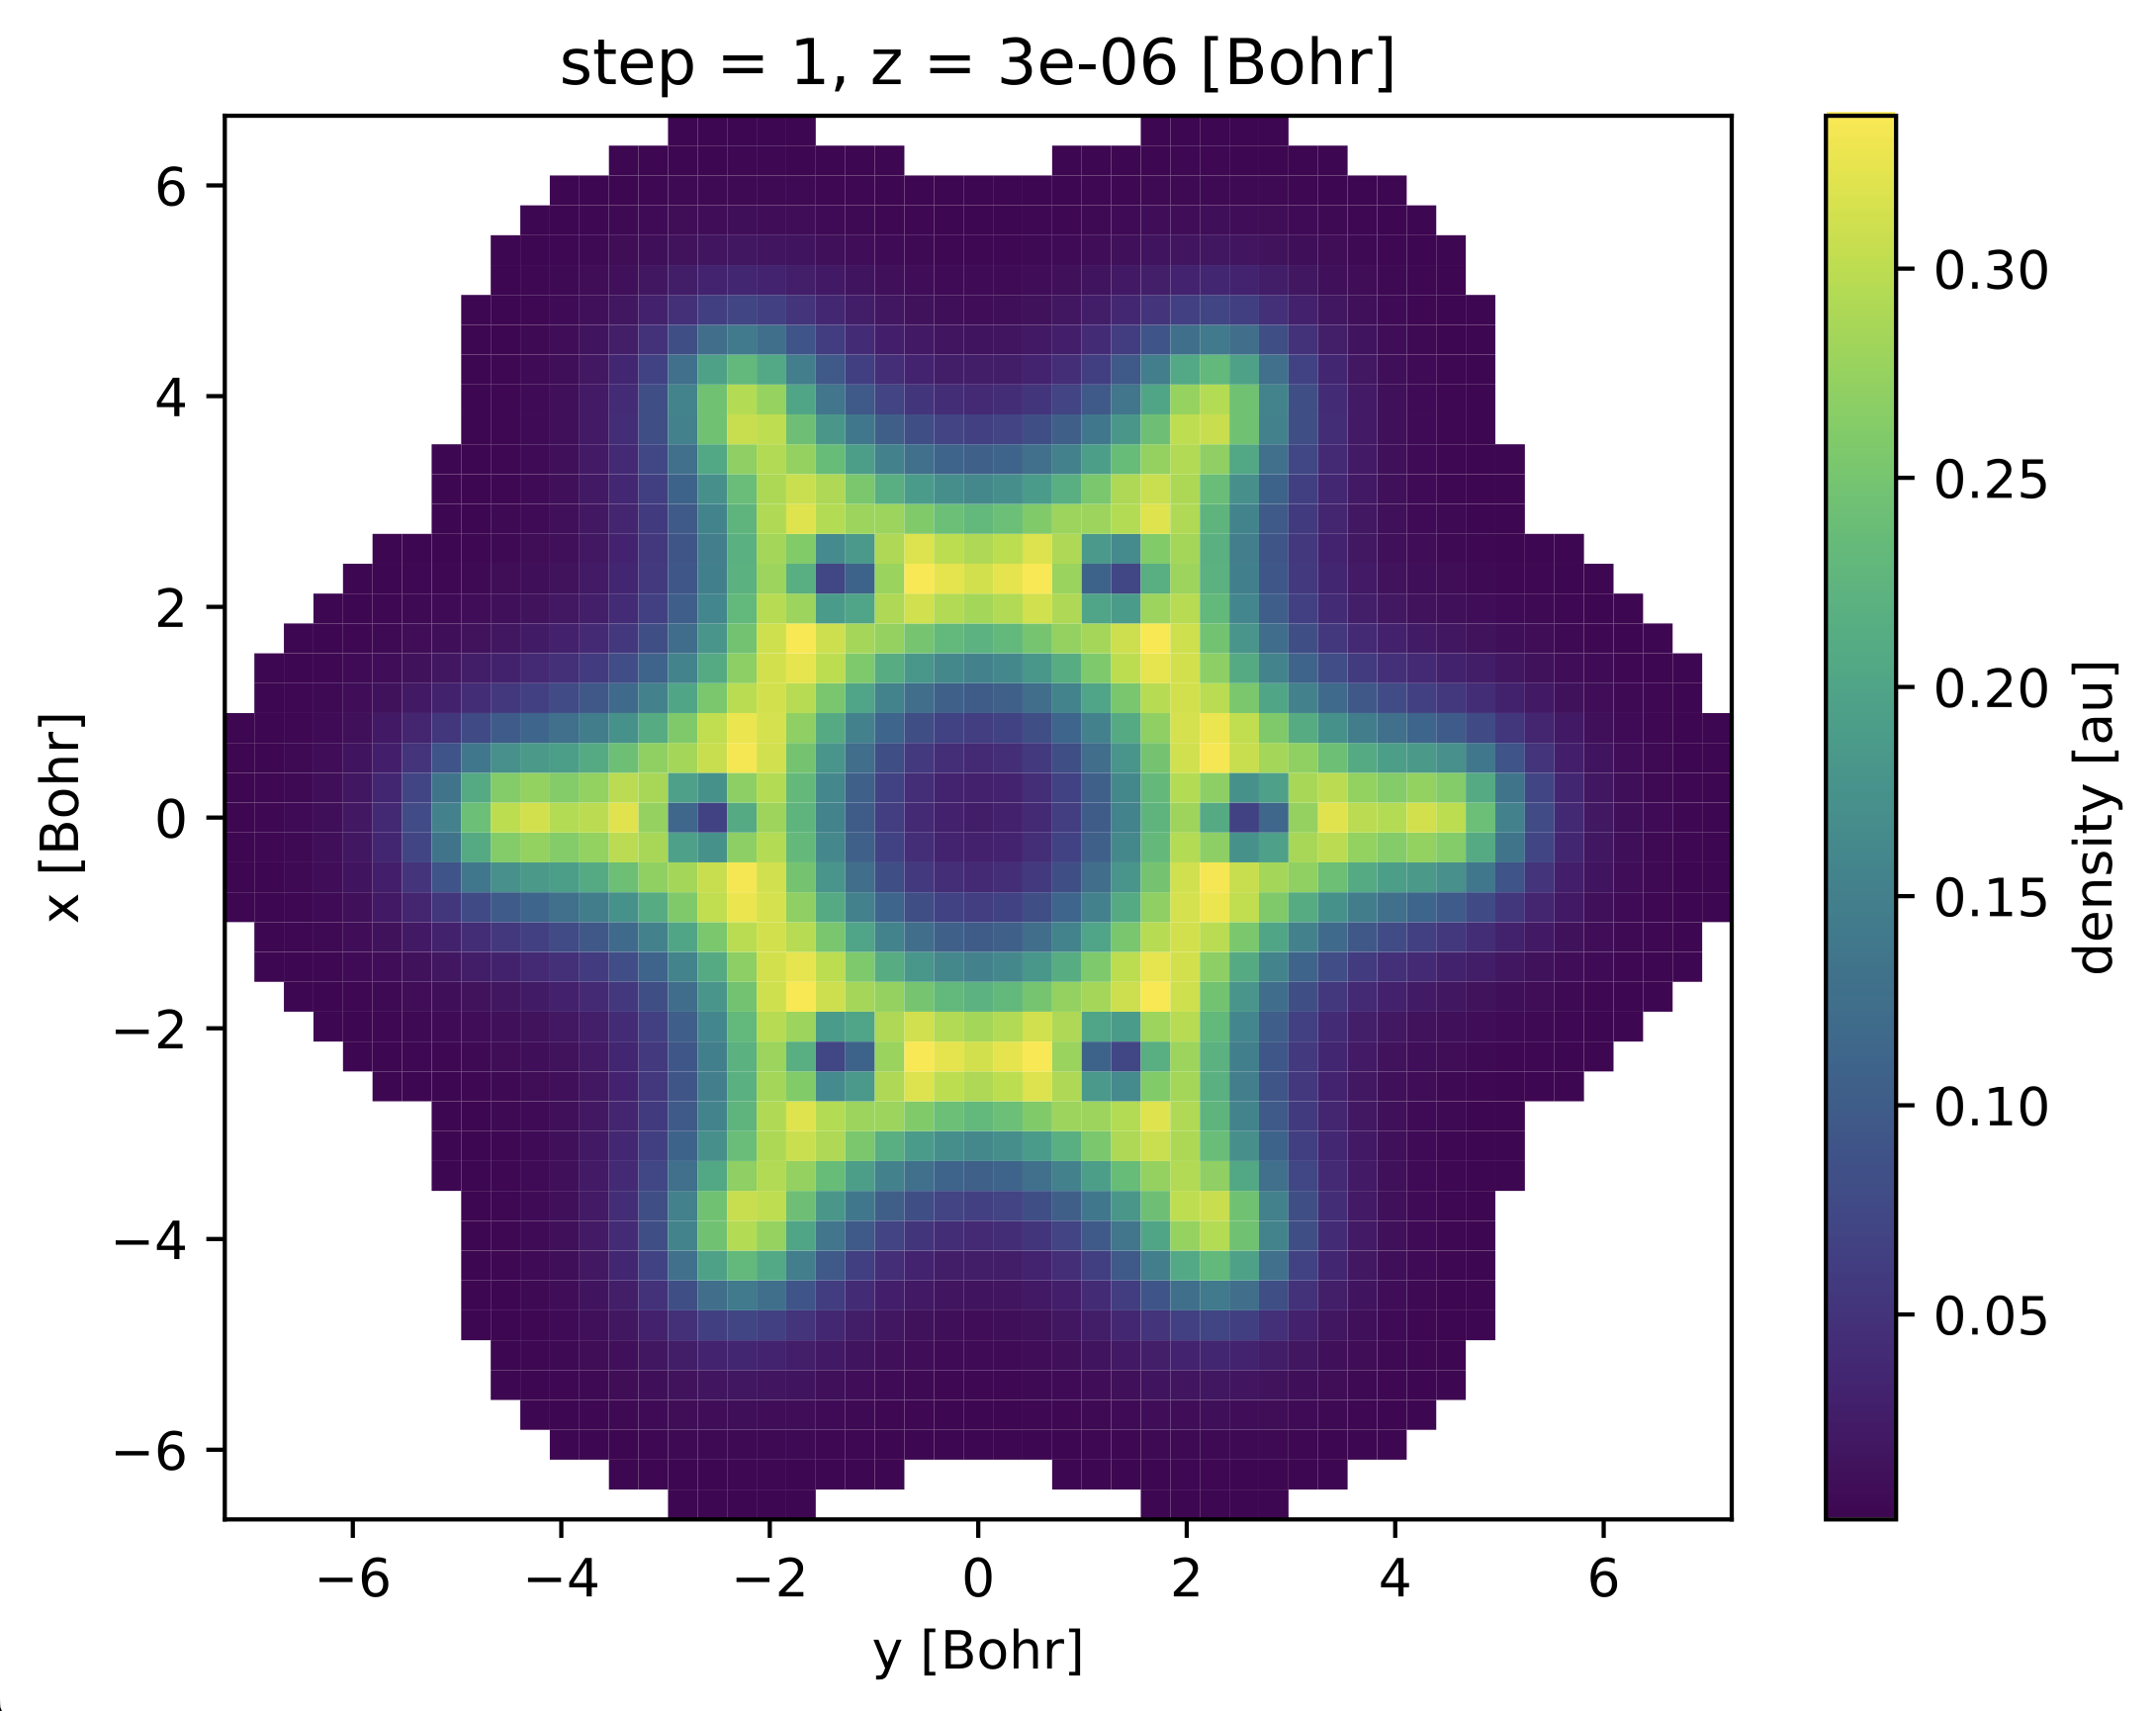 Electron density as function of spatial dimensions x and y.